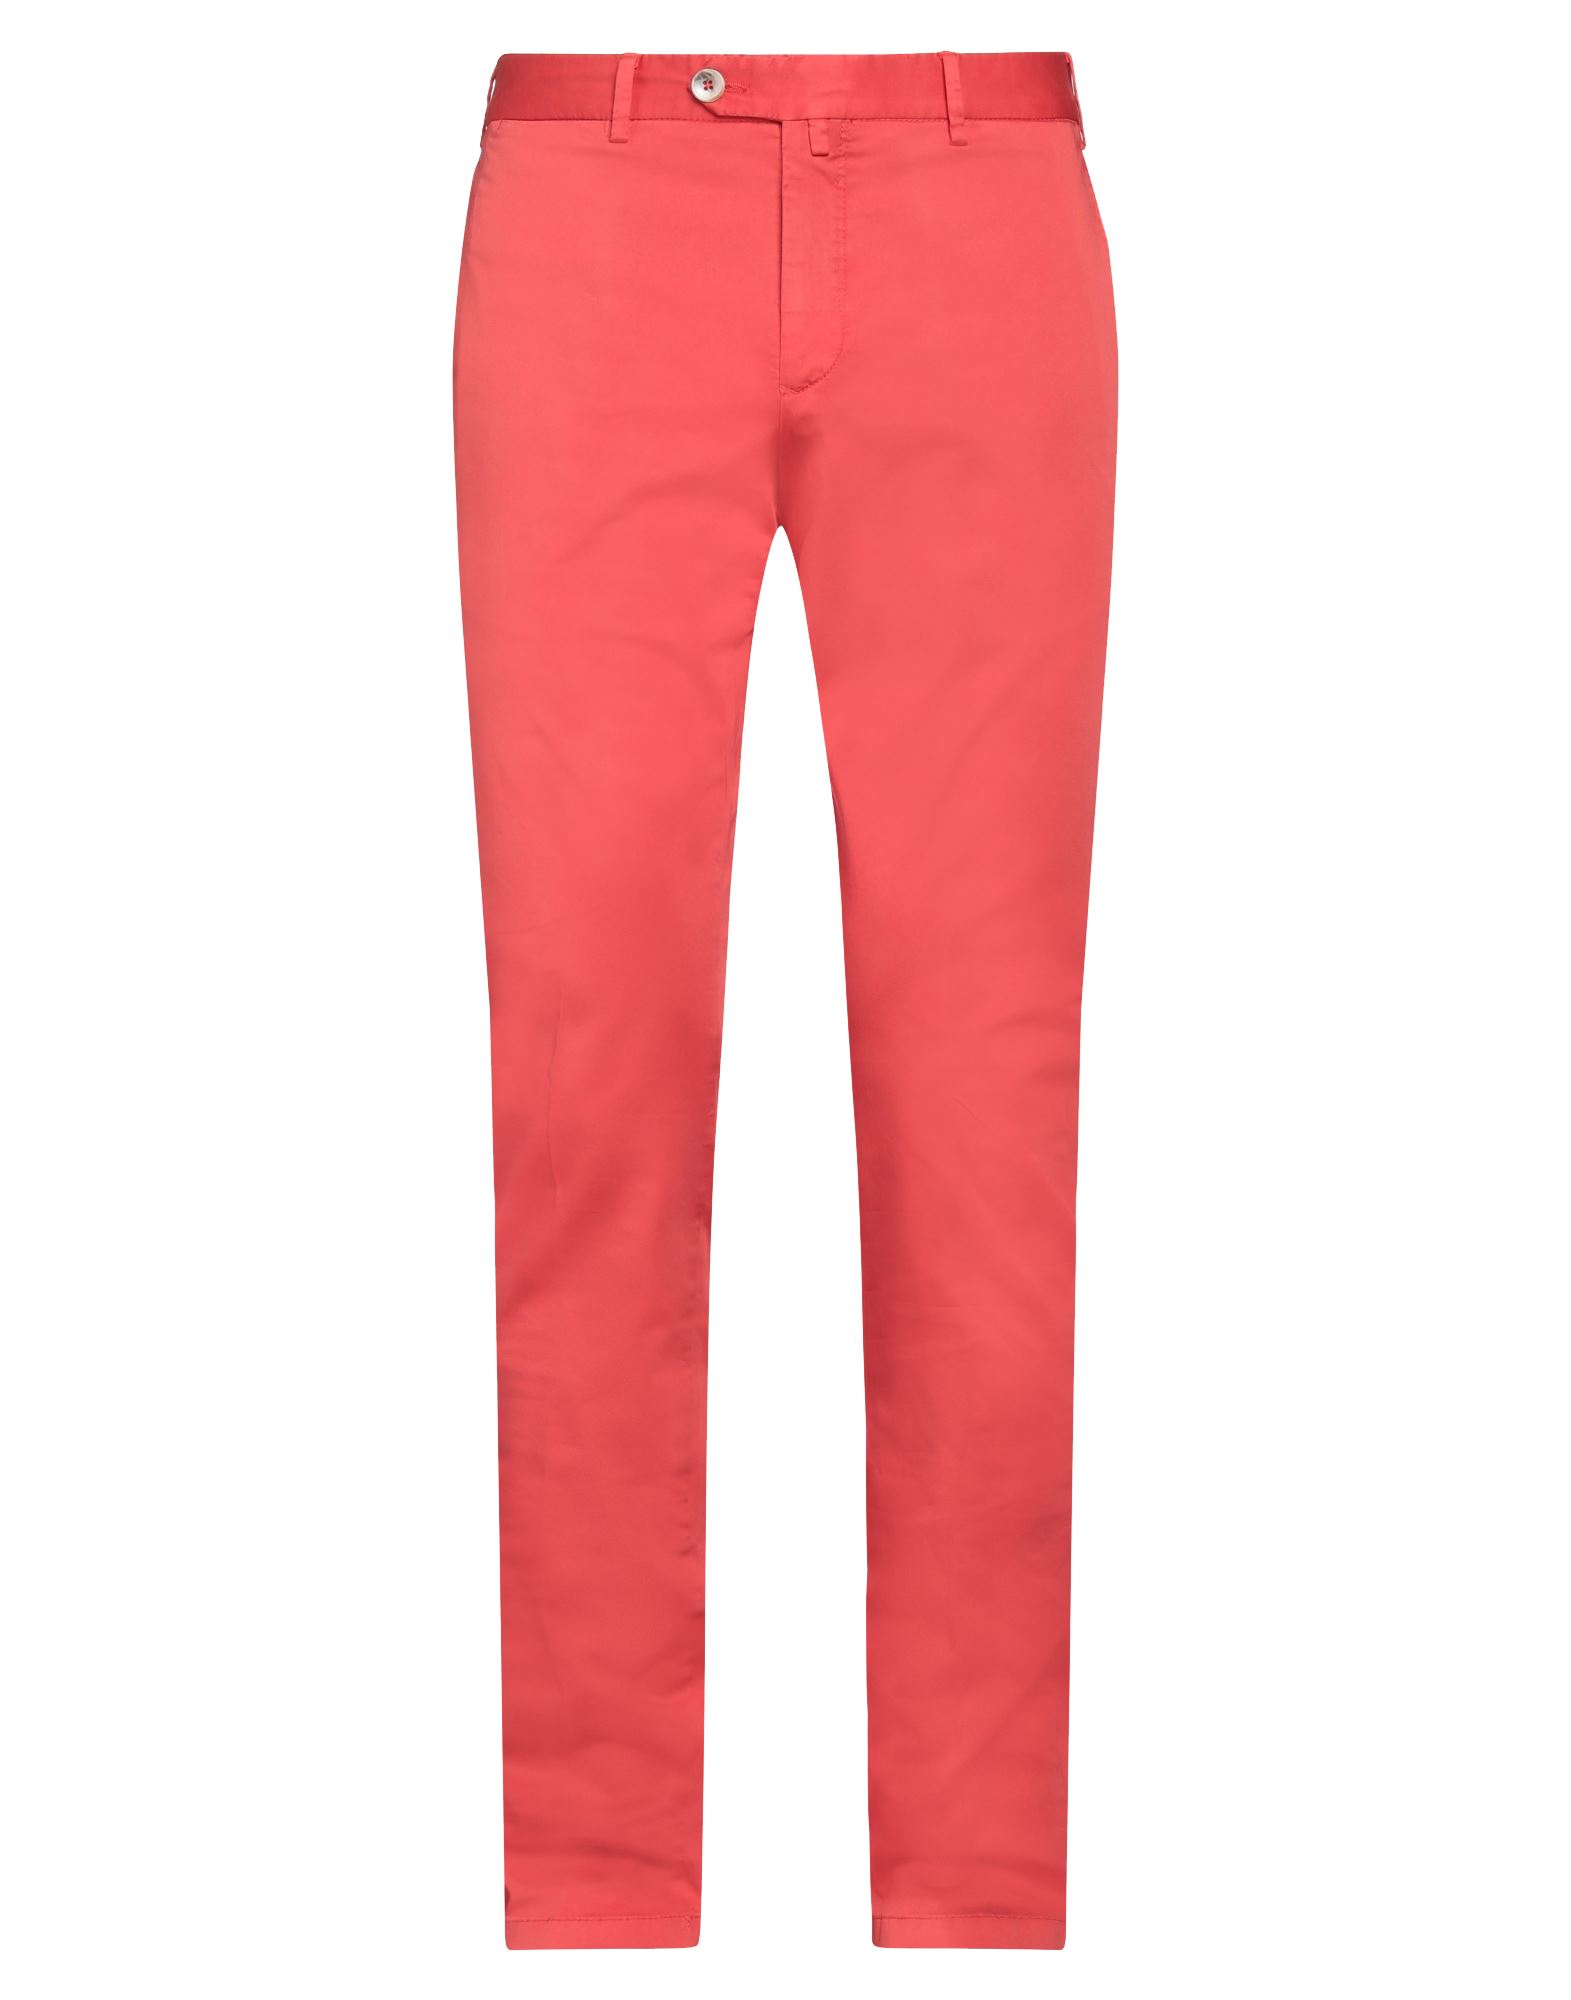 Flowers London Pants In Tomato Red